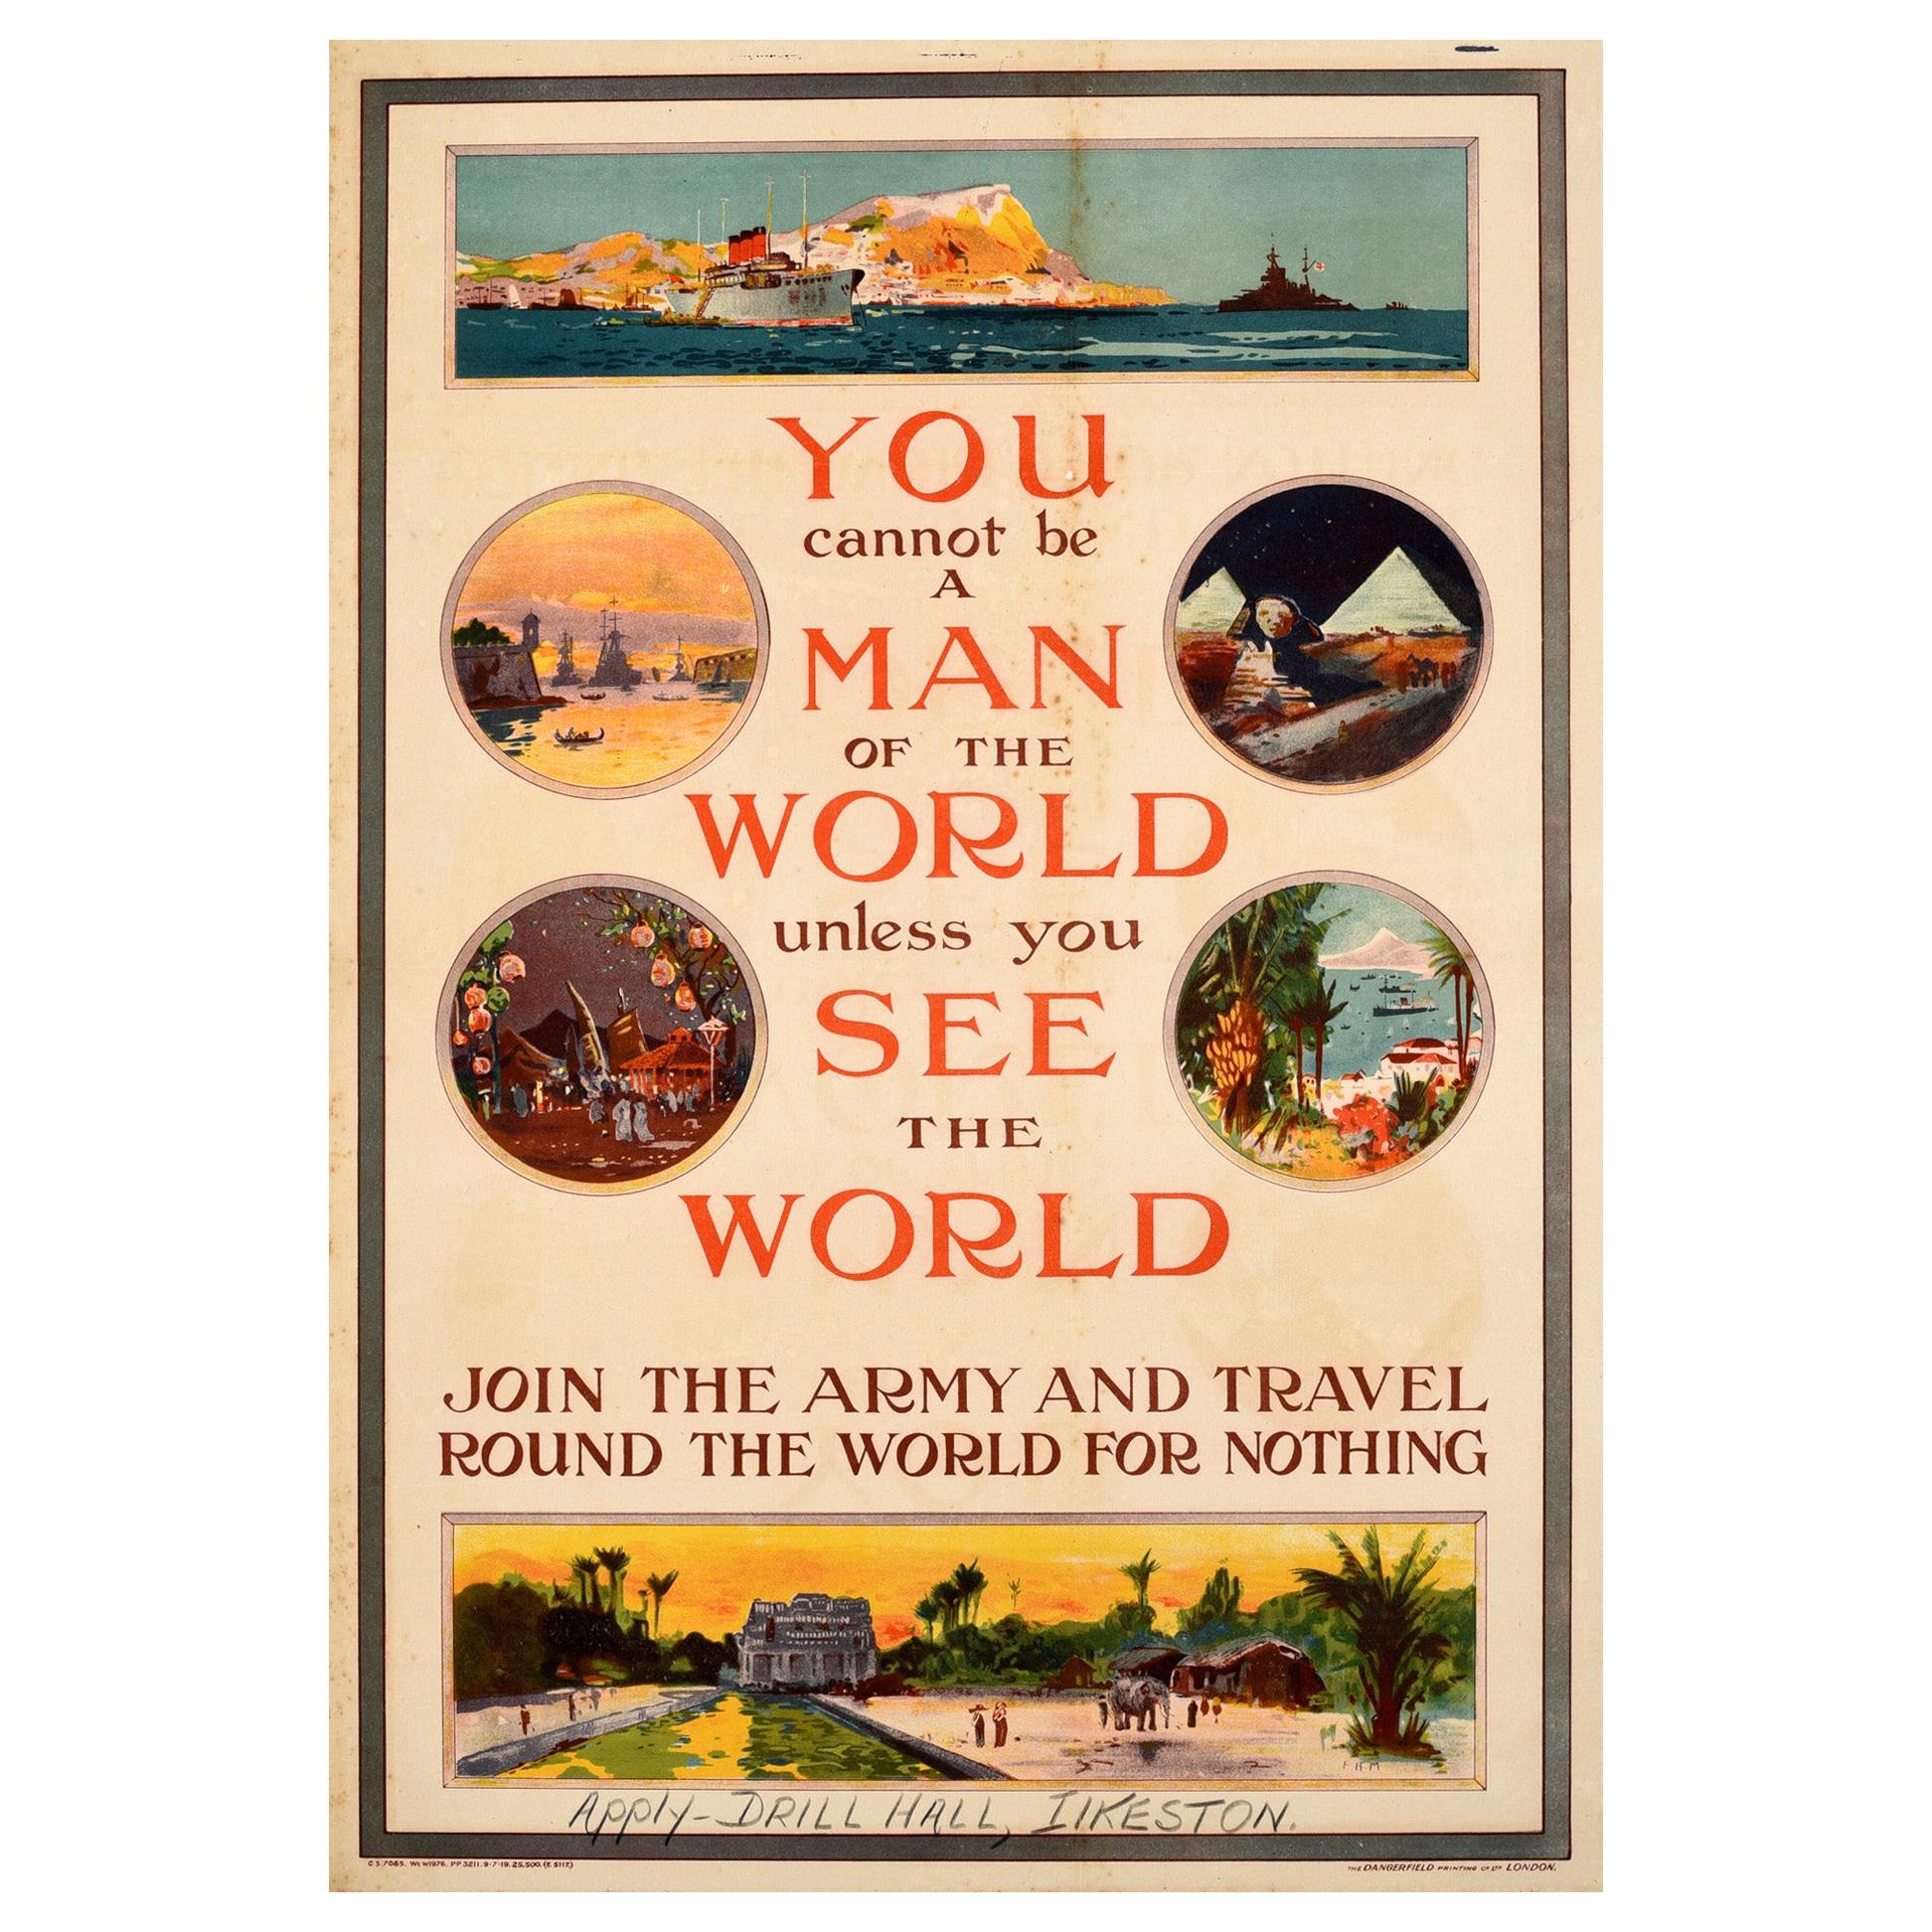 Original Antique Recruitment Poster - Join The Army And Travel Round The World